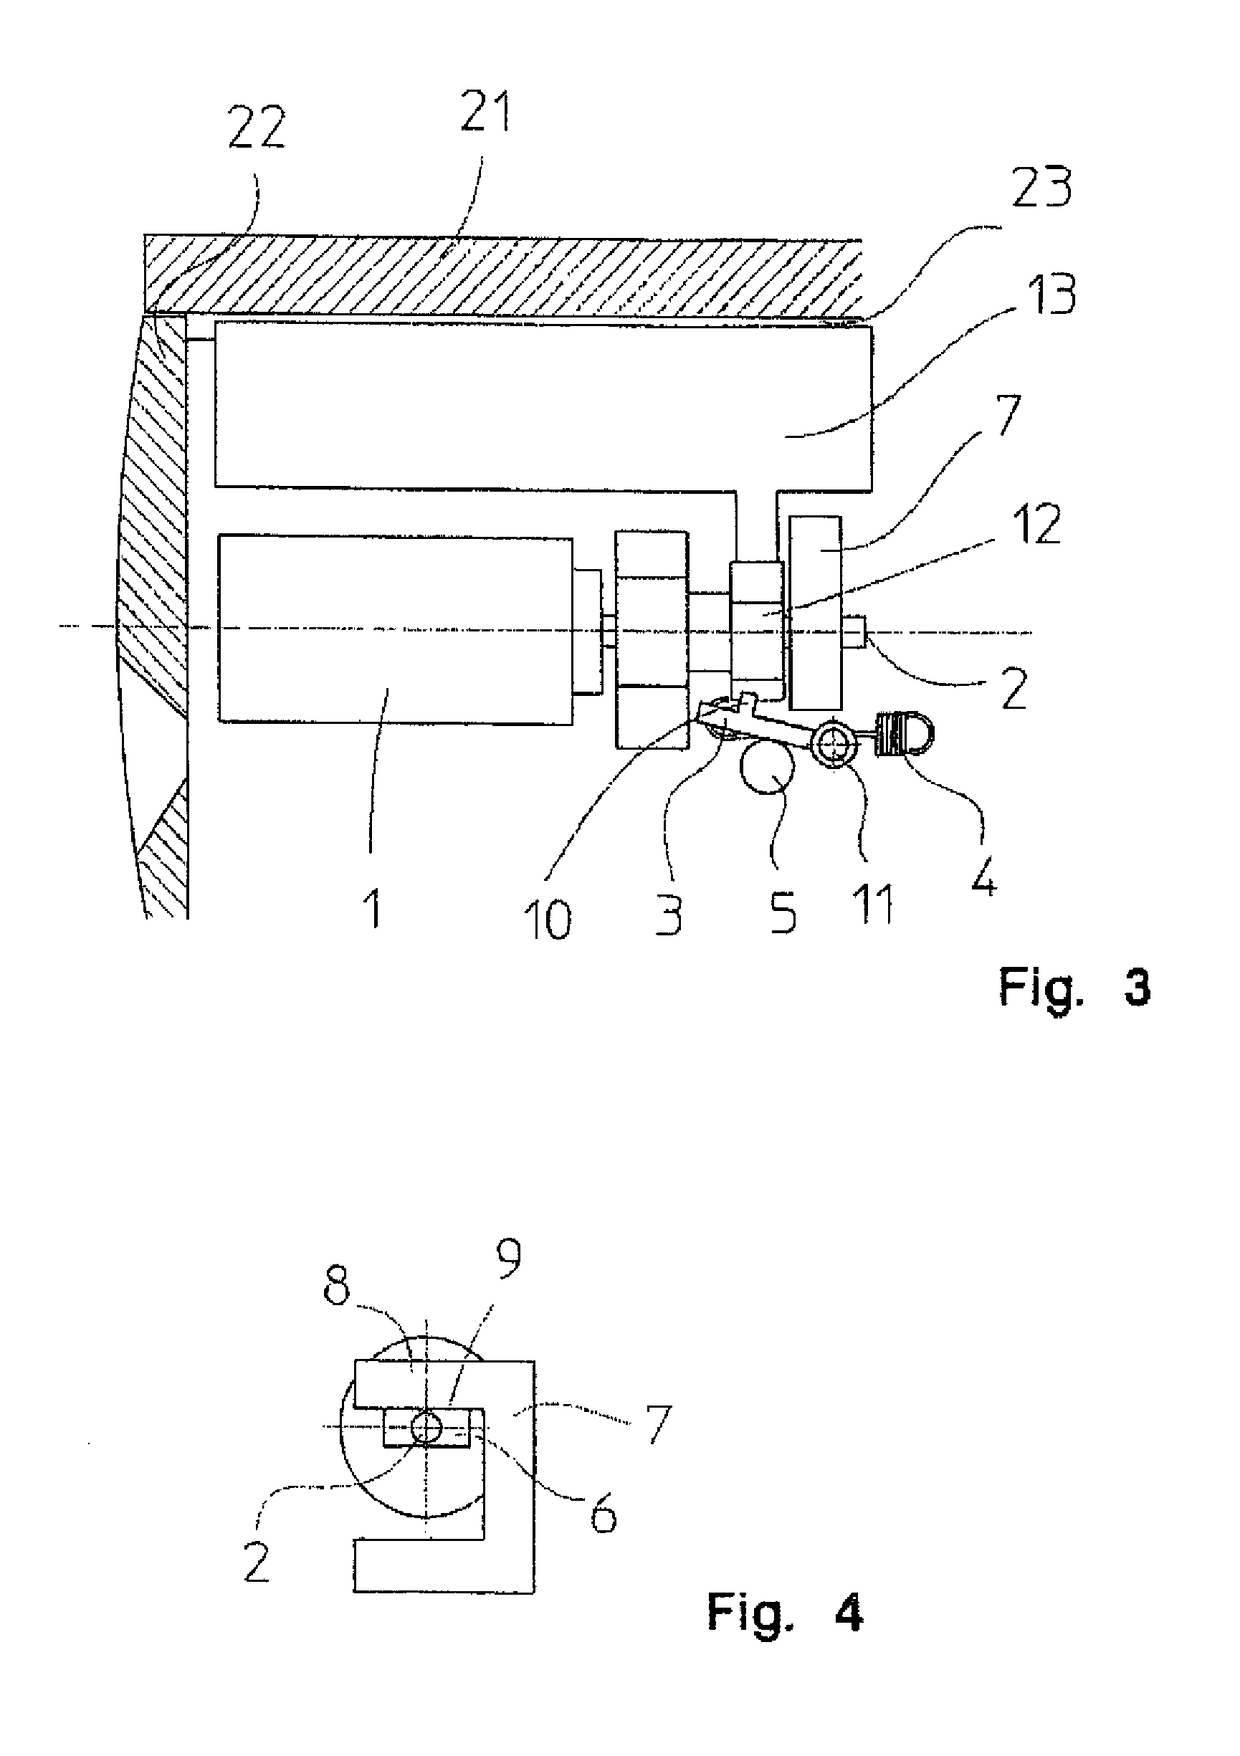 Movement lock for a locking element or an actuator in a locking system